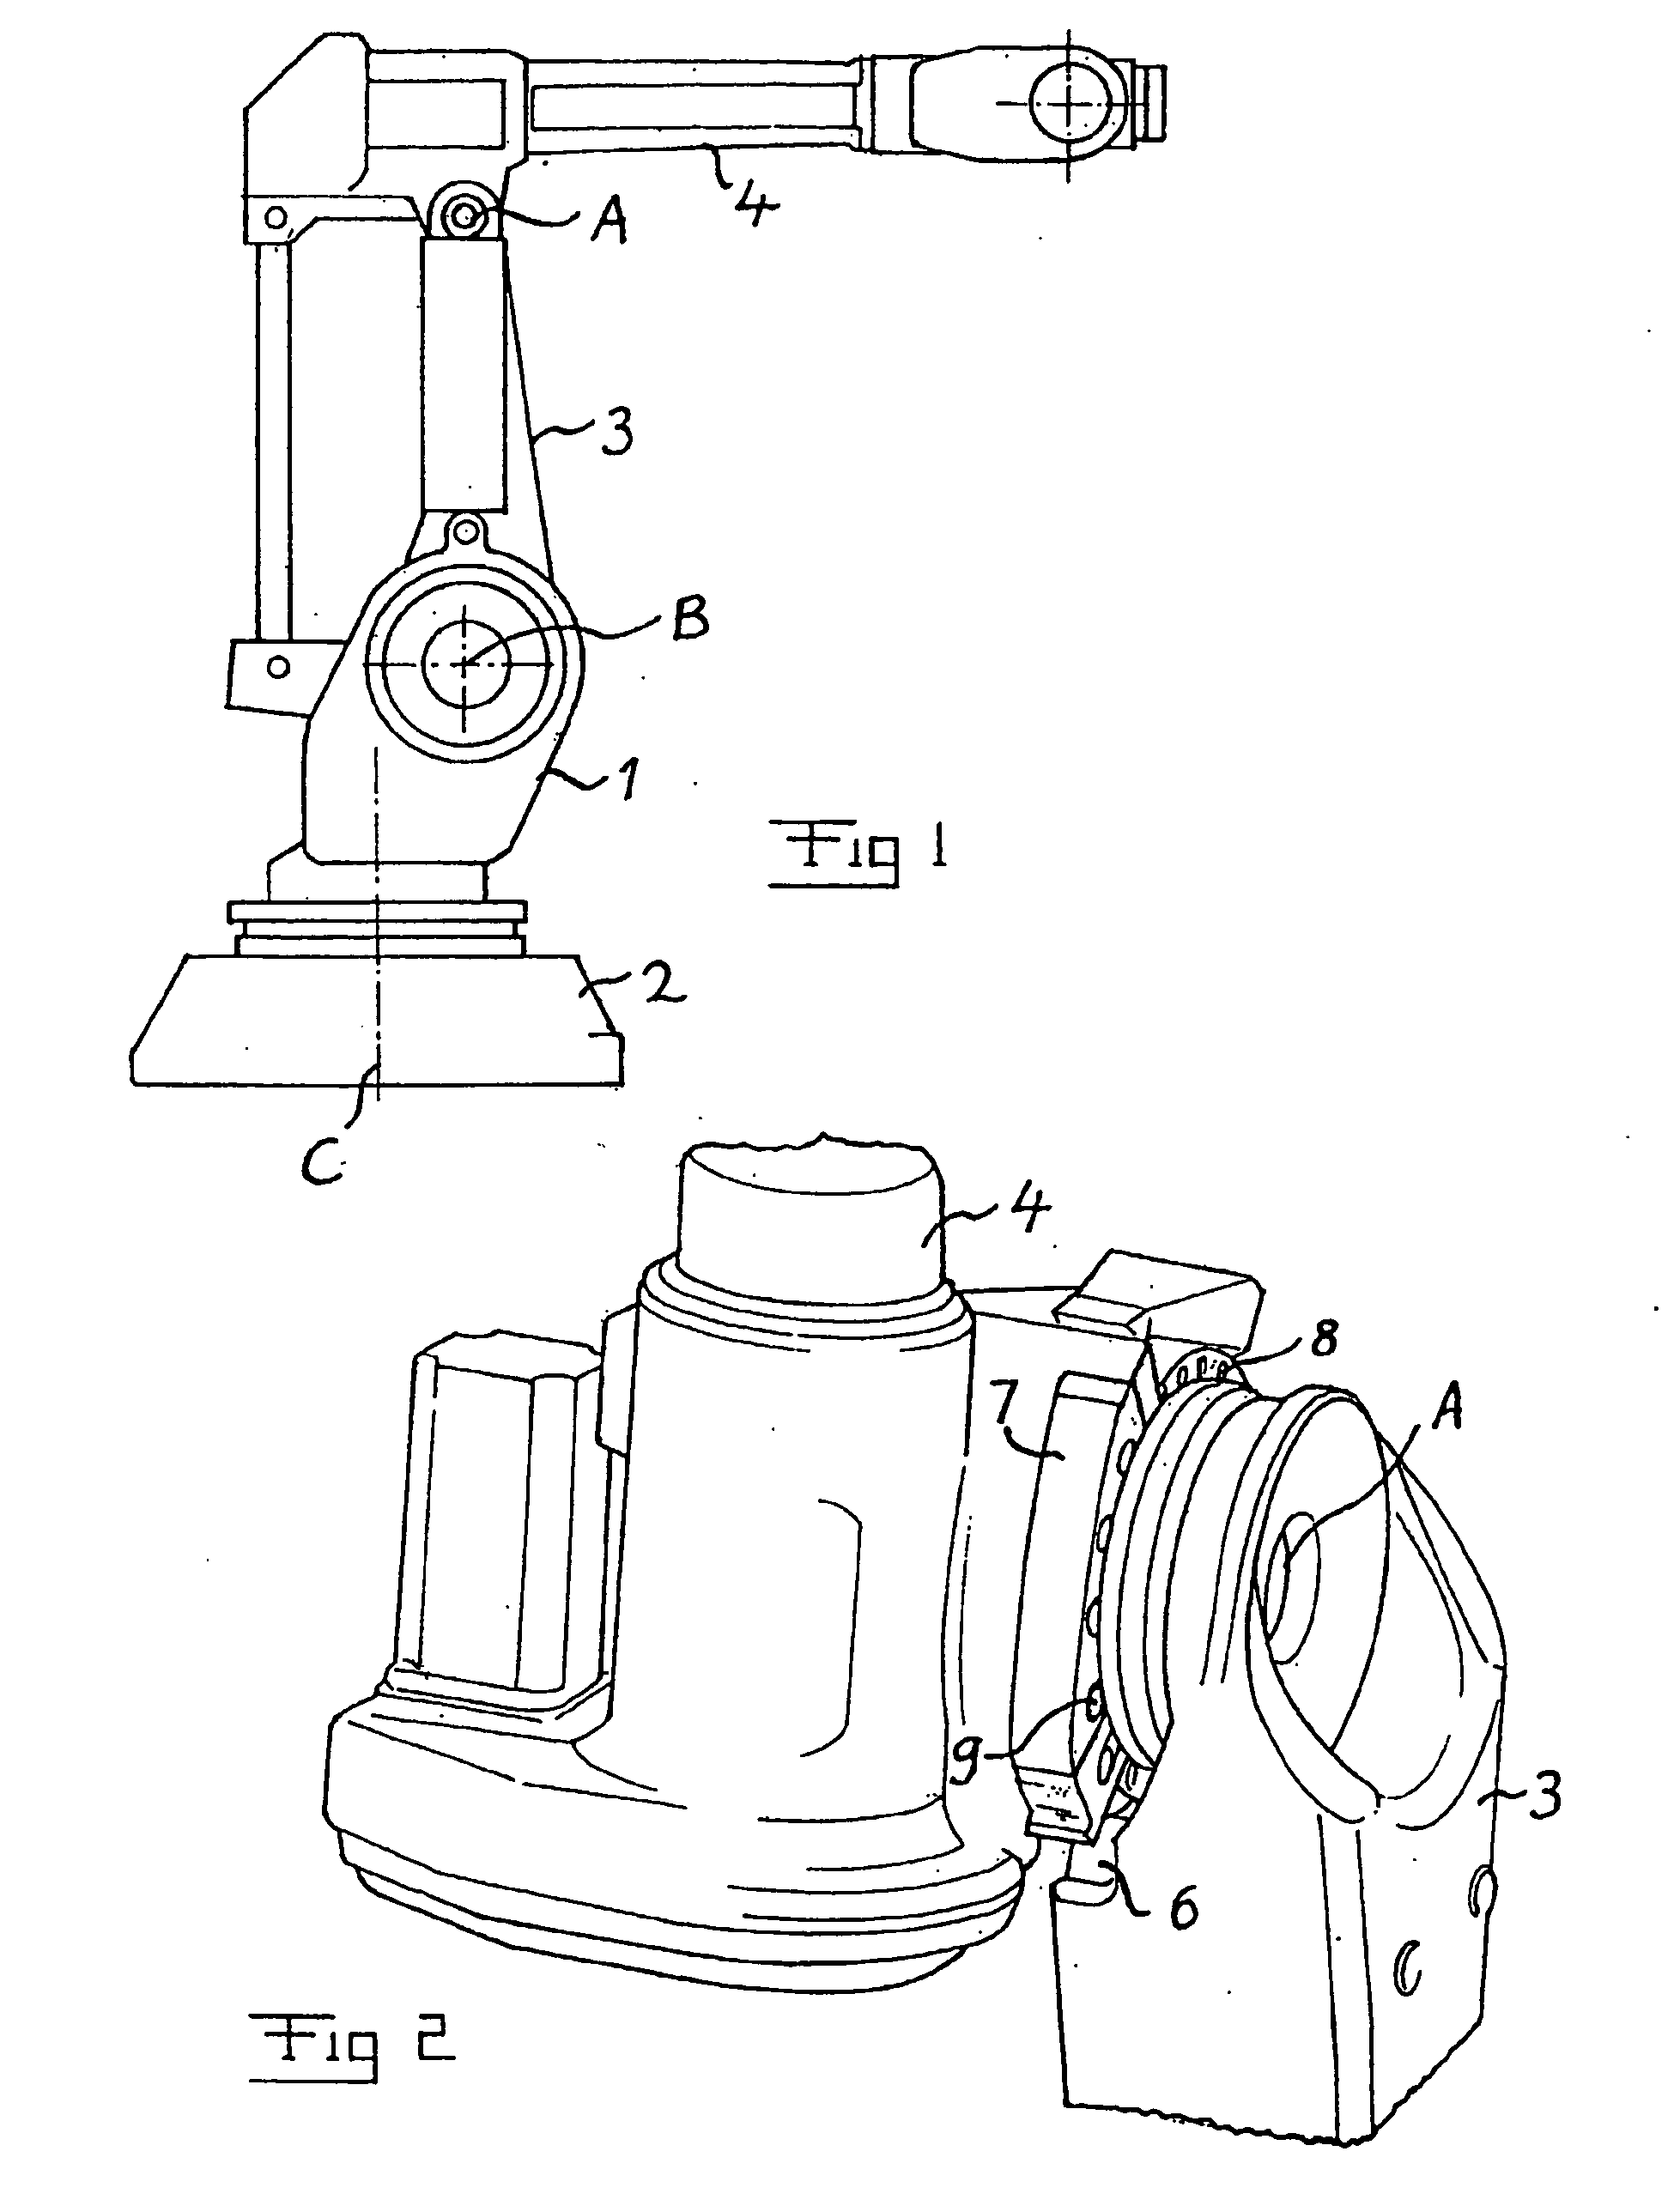 Device for an industrial robot